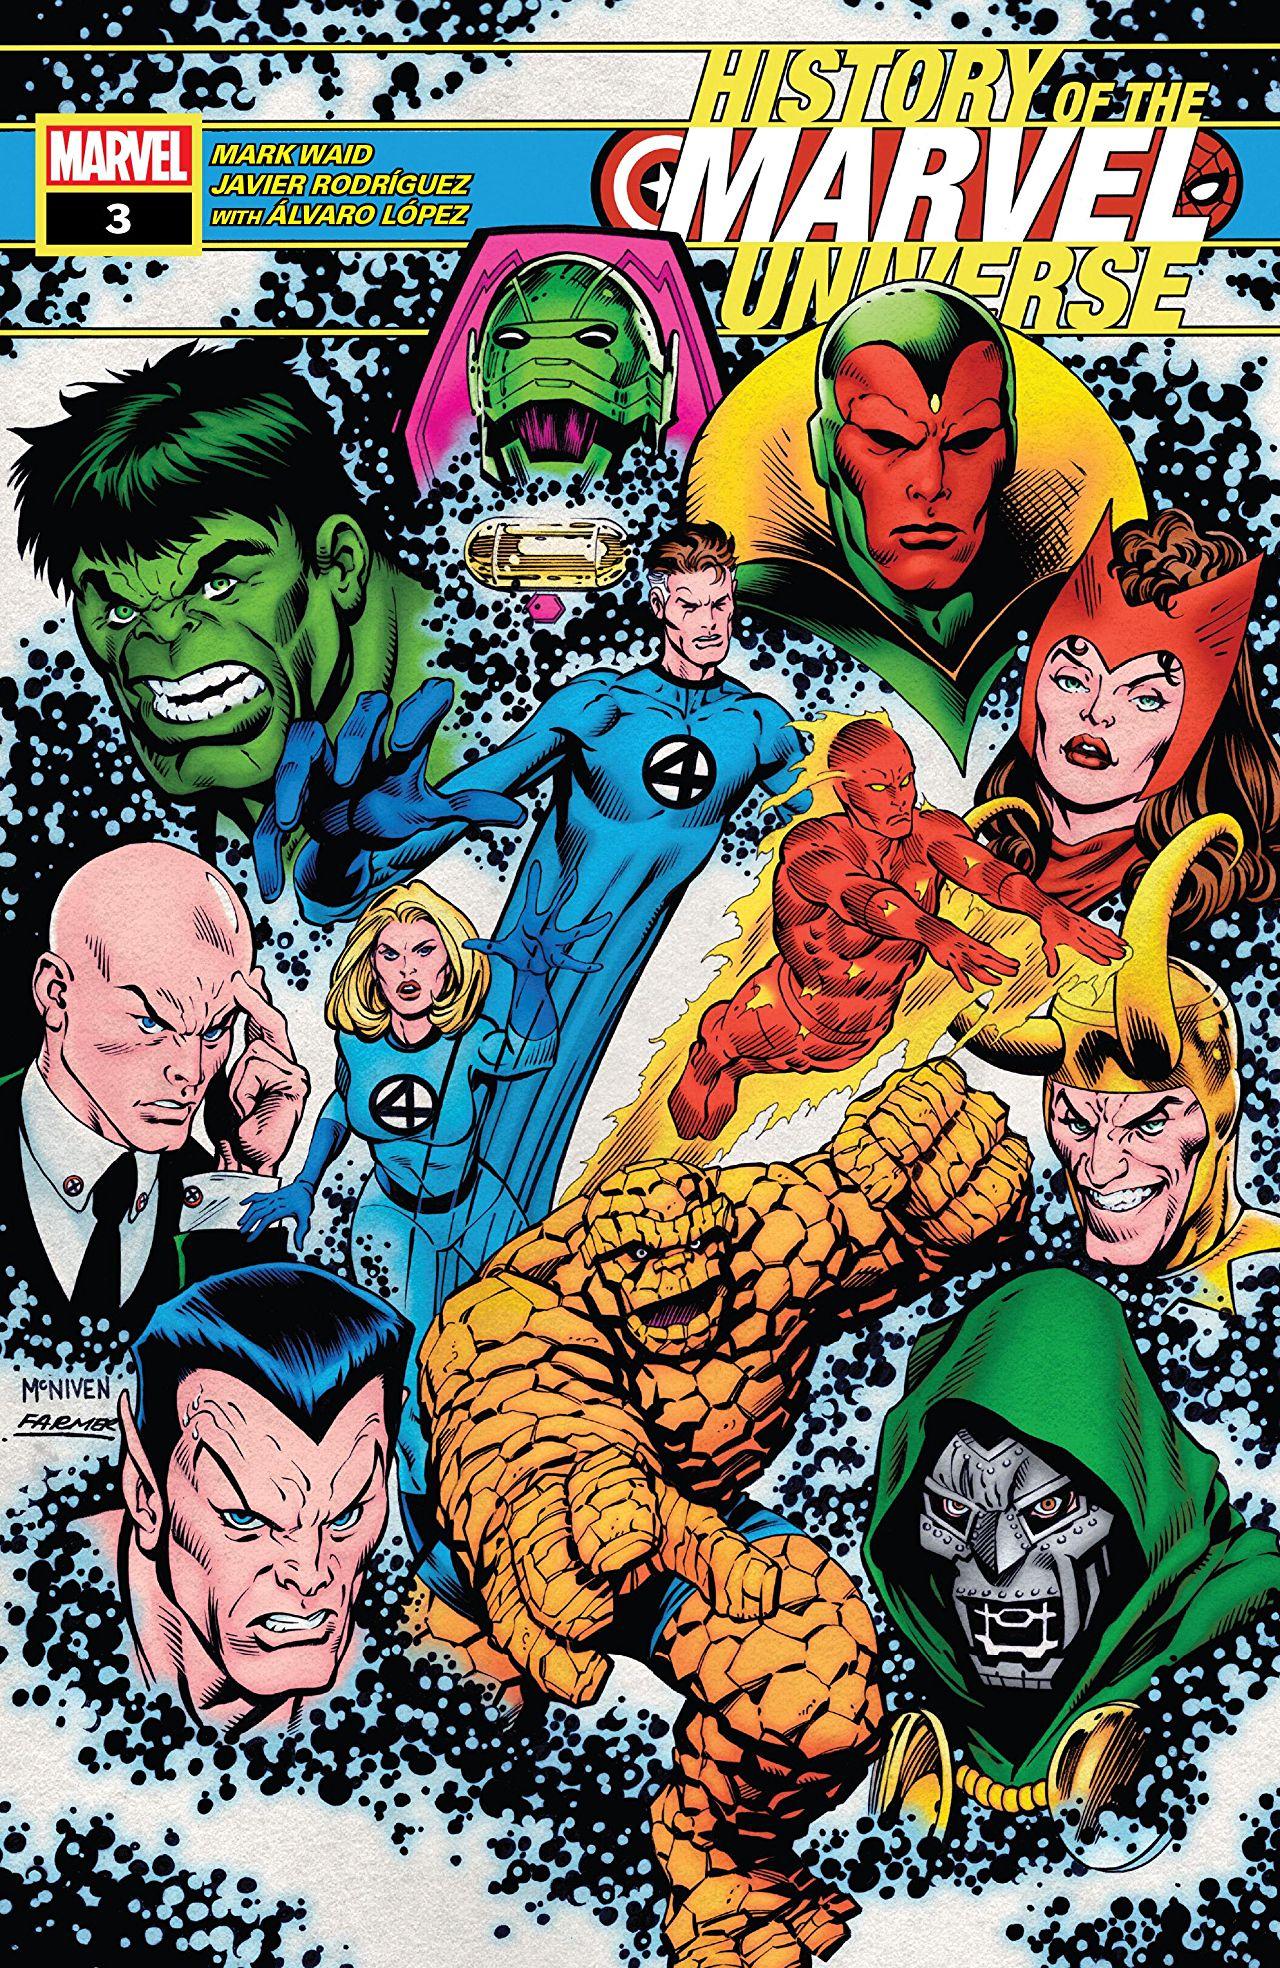 History of the Marvel Universe Vol. 2 #3